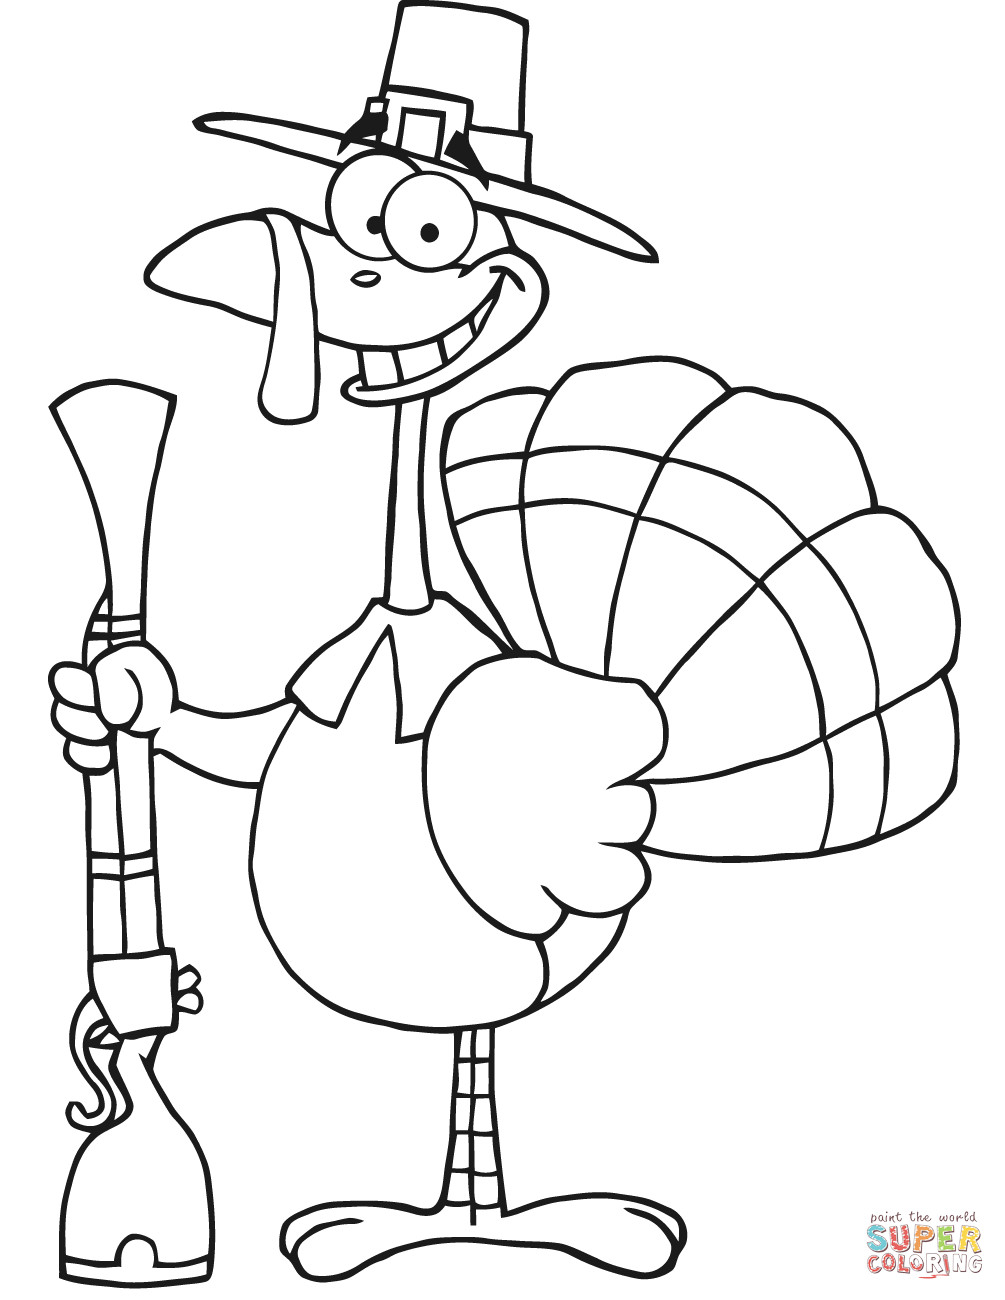 Happy Thanksgiving Coloring Pages For Boys
 Happy Turkey with Pilgrim Hat and Musket coloring page